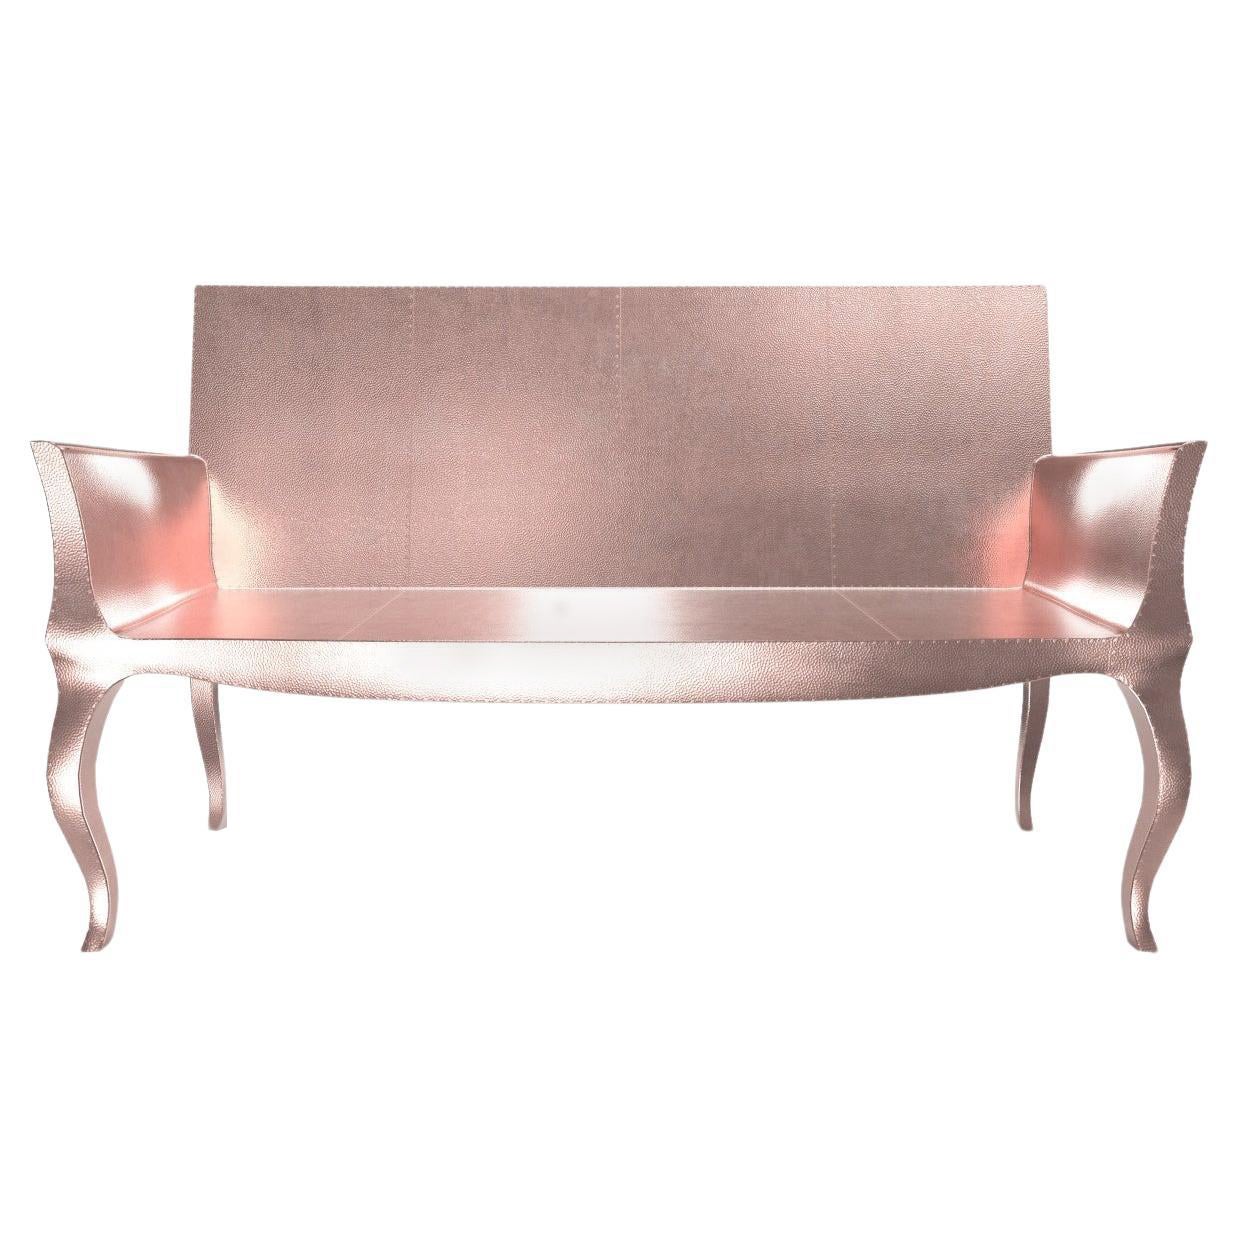 Louise Settee Art Deco Daybeds in Mid. Hammered Copper by Paul Mathieu